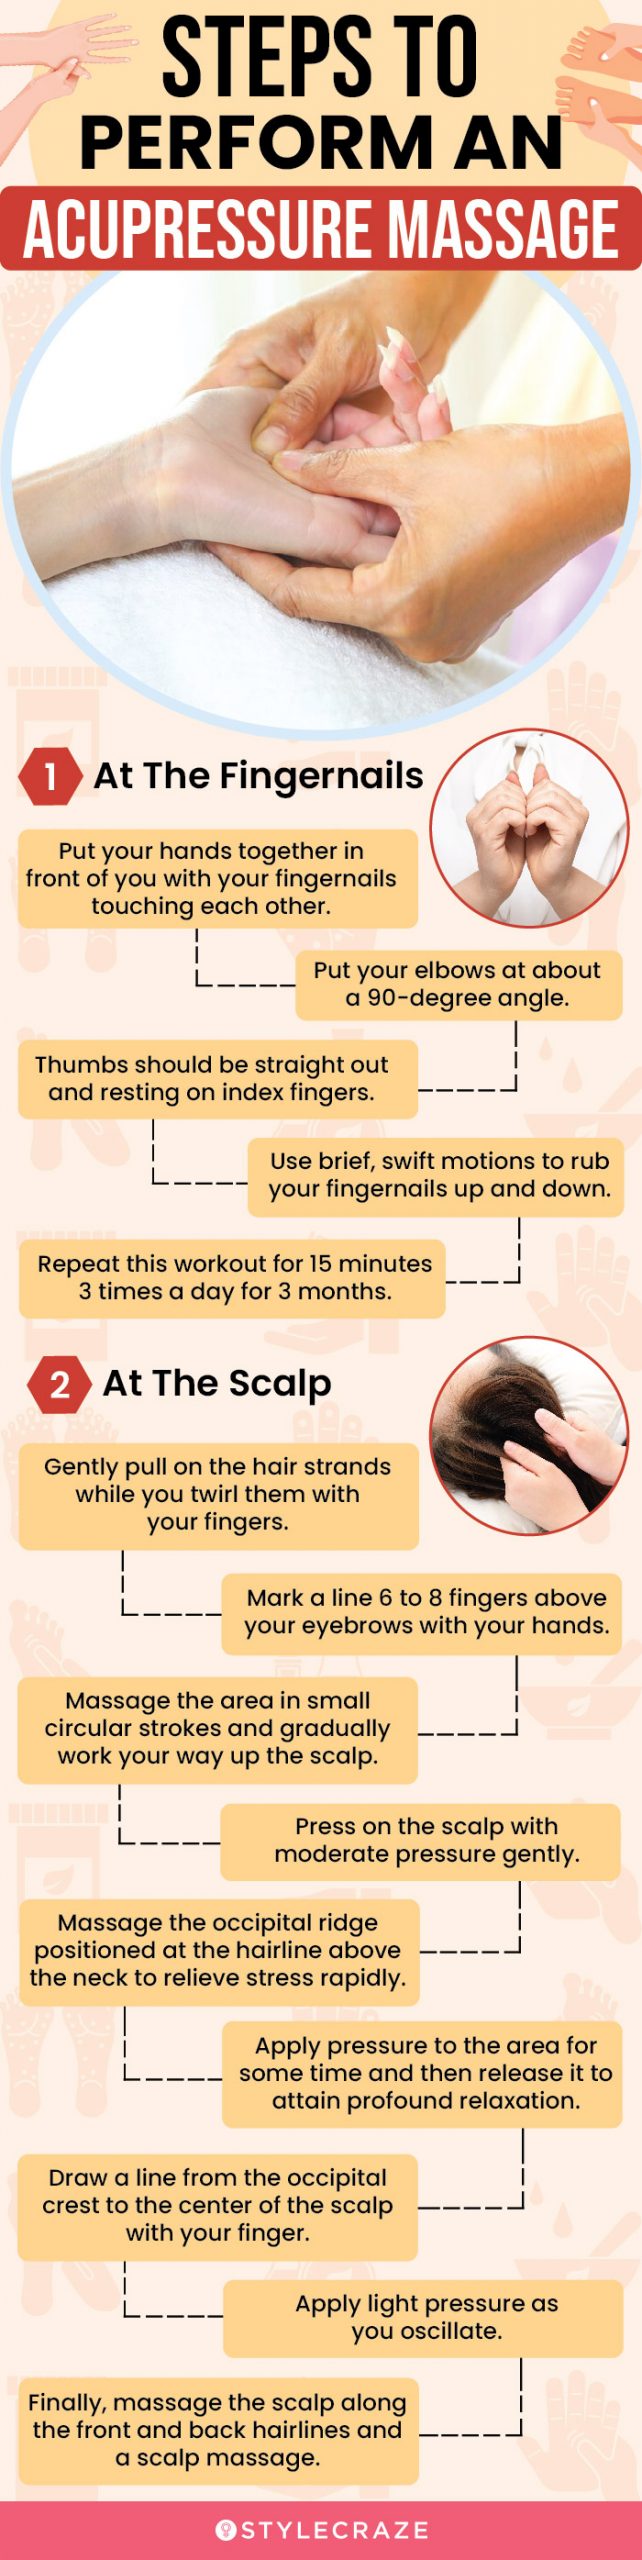 steps to perform an acupressure massage (infographic)